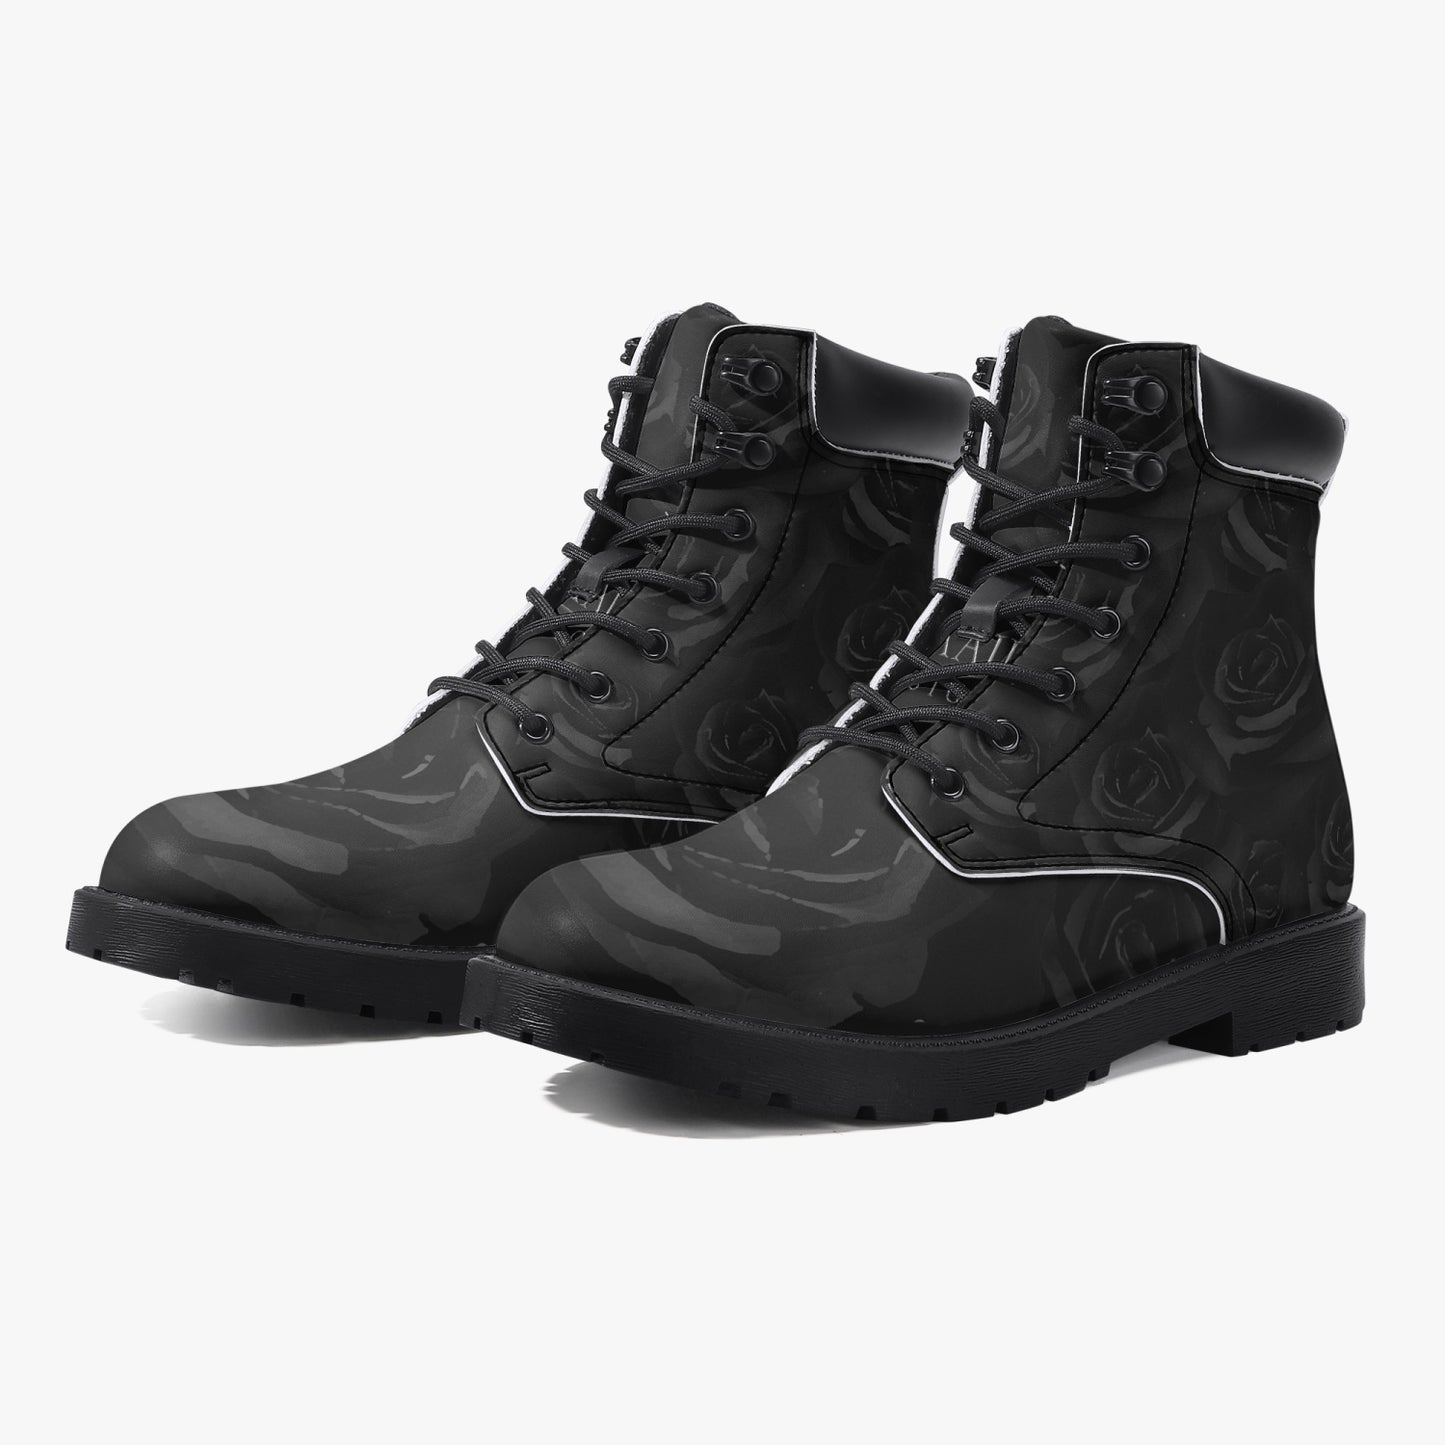 Black Roses Leather Boots